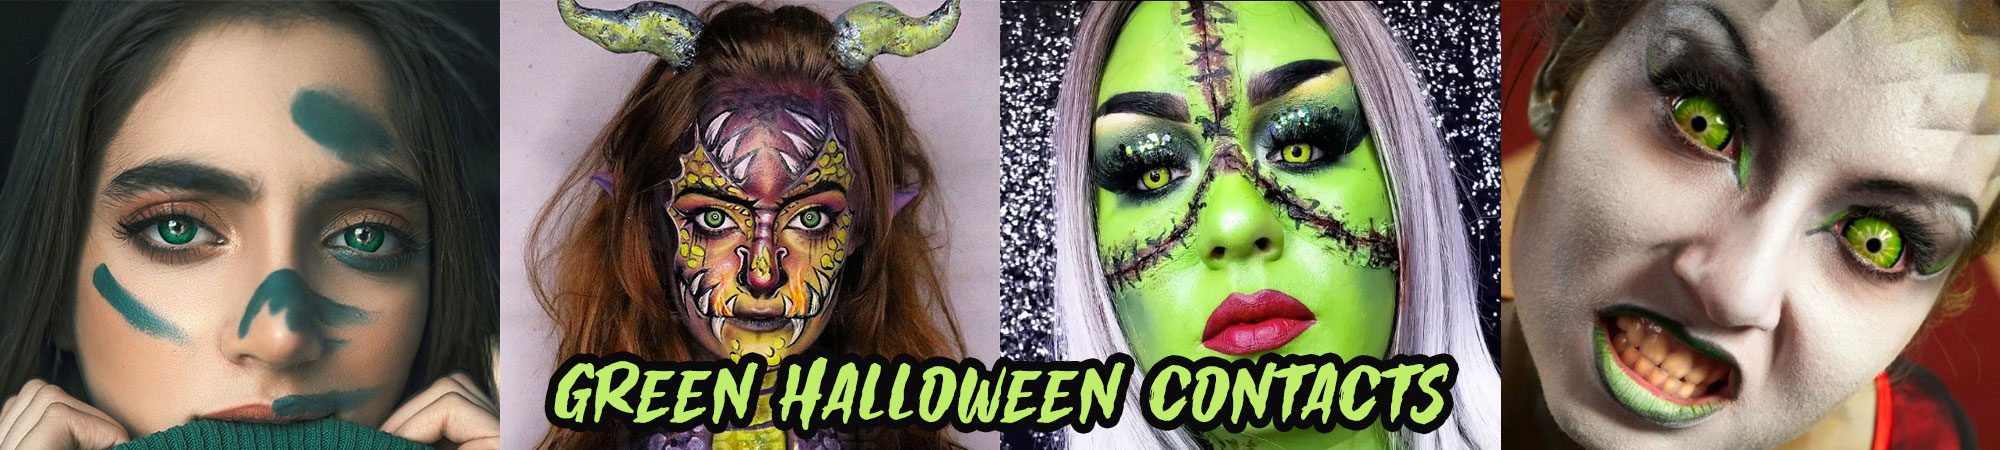 green halloween contacts